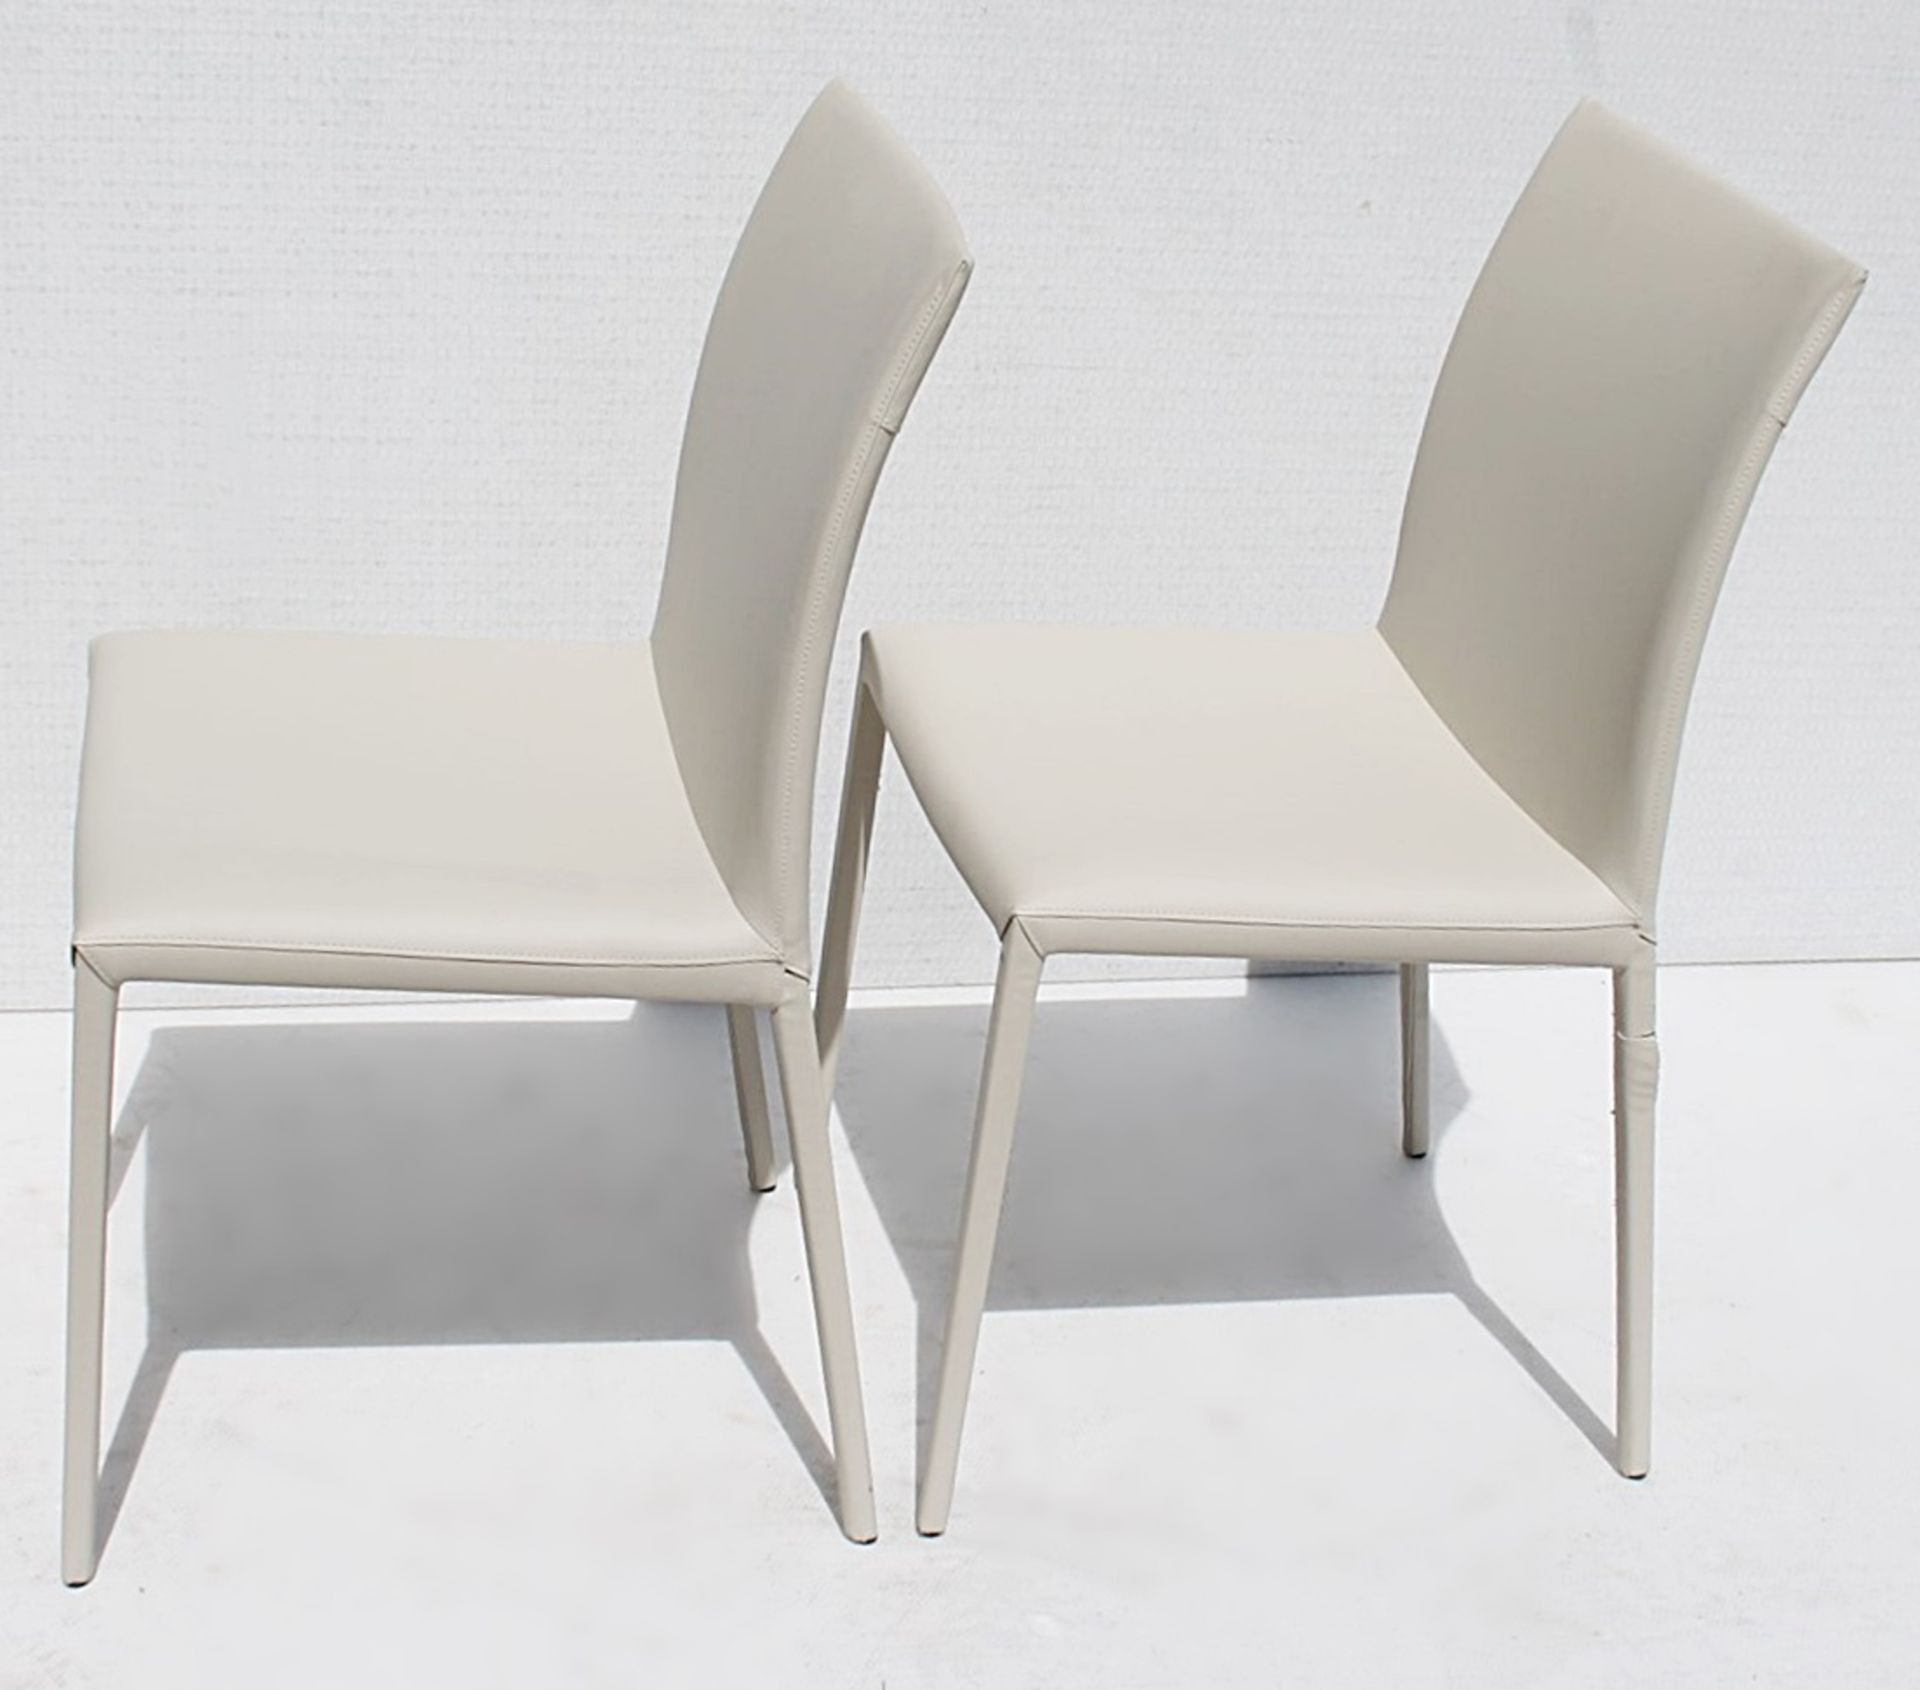 Pair Of CATELLAN 'Norma' Designer Italian Leather Chairs With Curved Backs In A Pale Taupe - Image 3 of 6